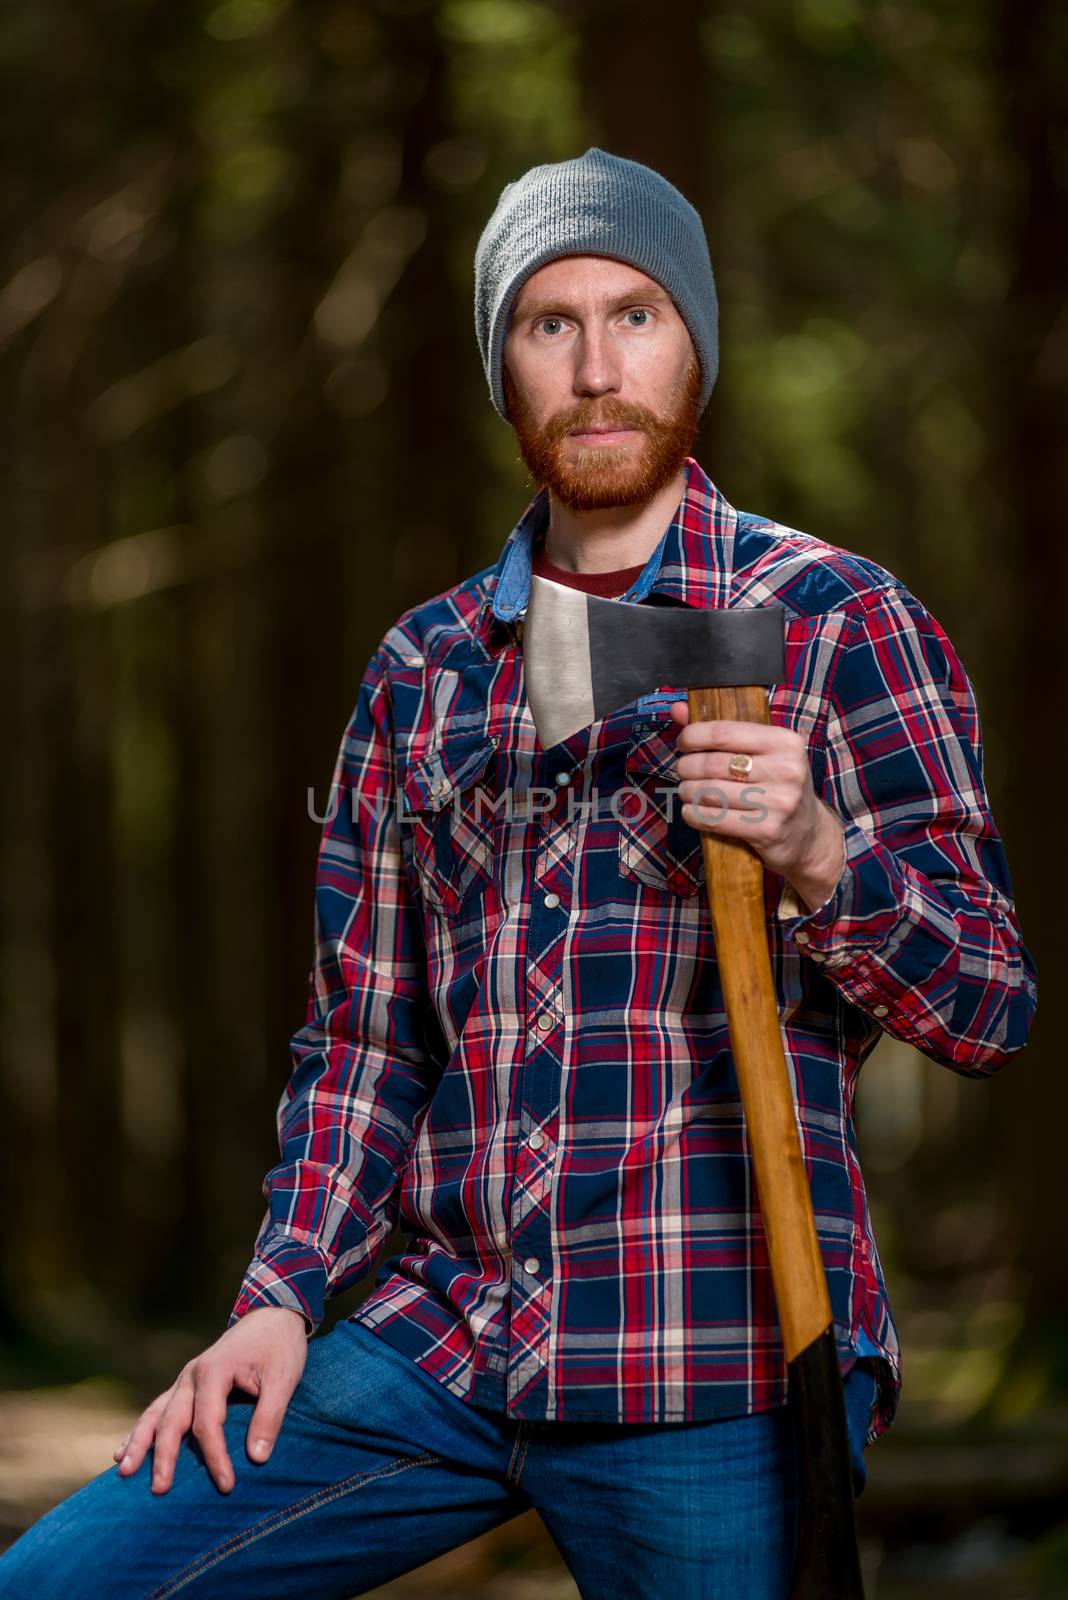 portrait of a man with an ax in his hands in the woods by kosmsos111